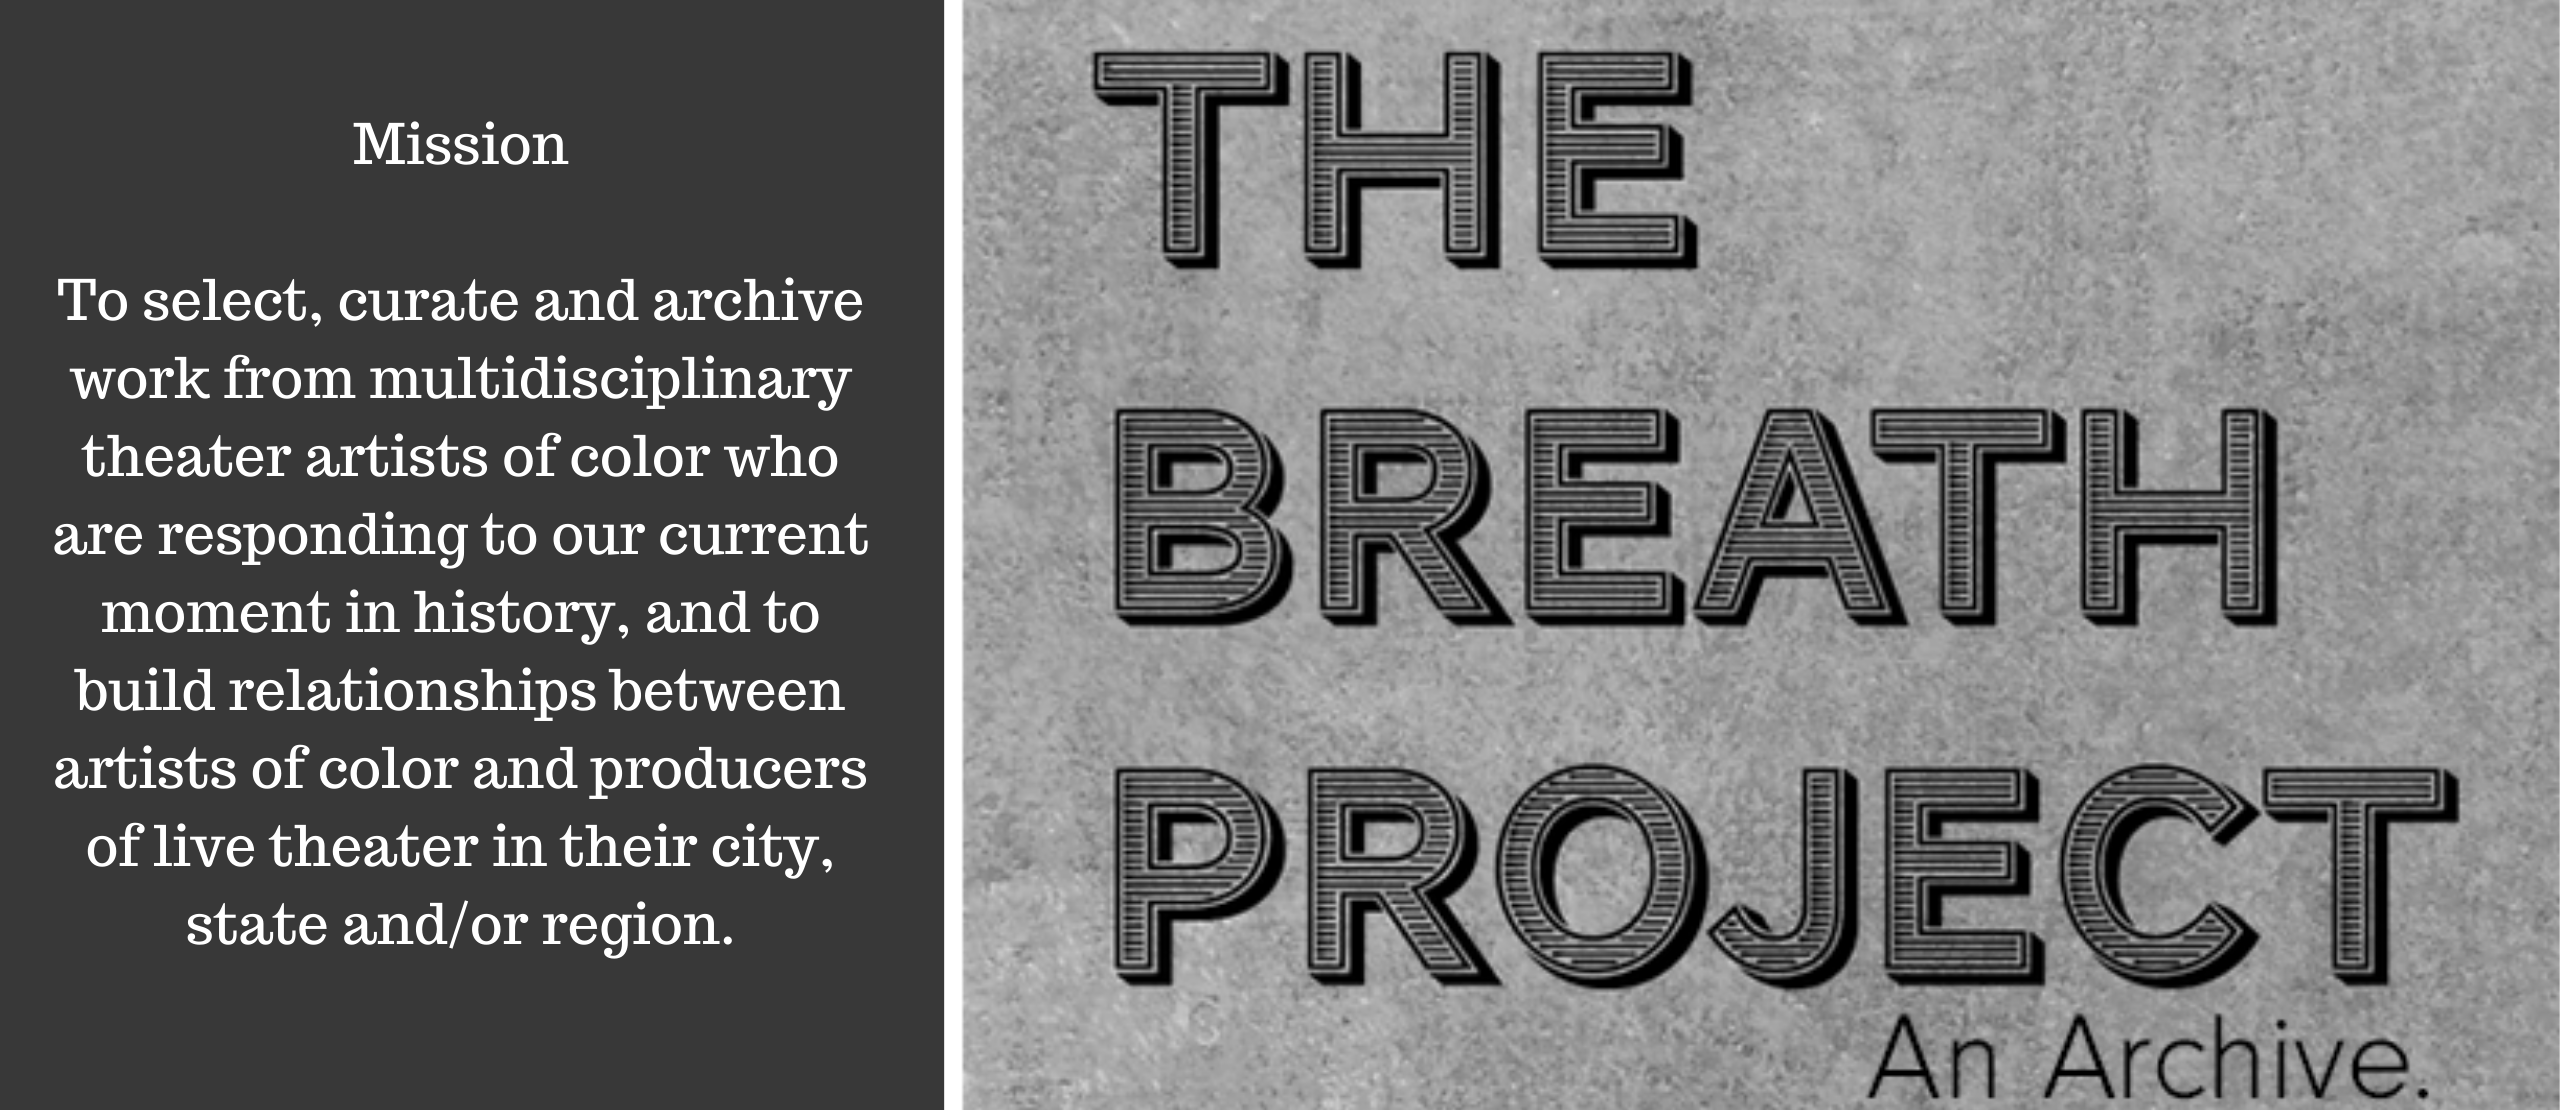 The Breath Project Mission statement